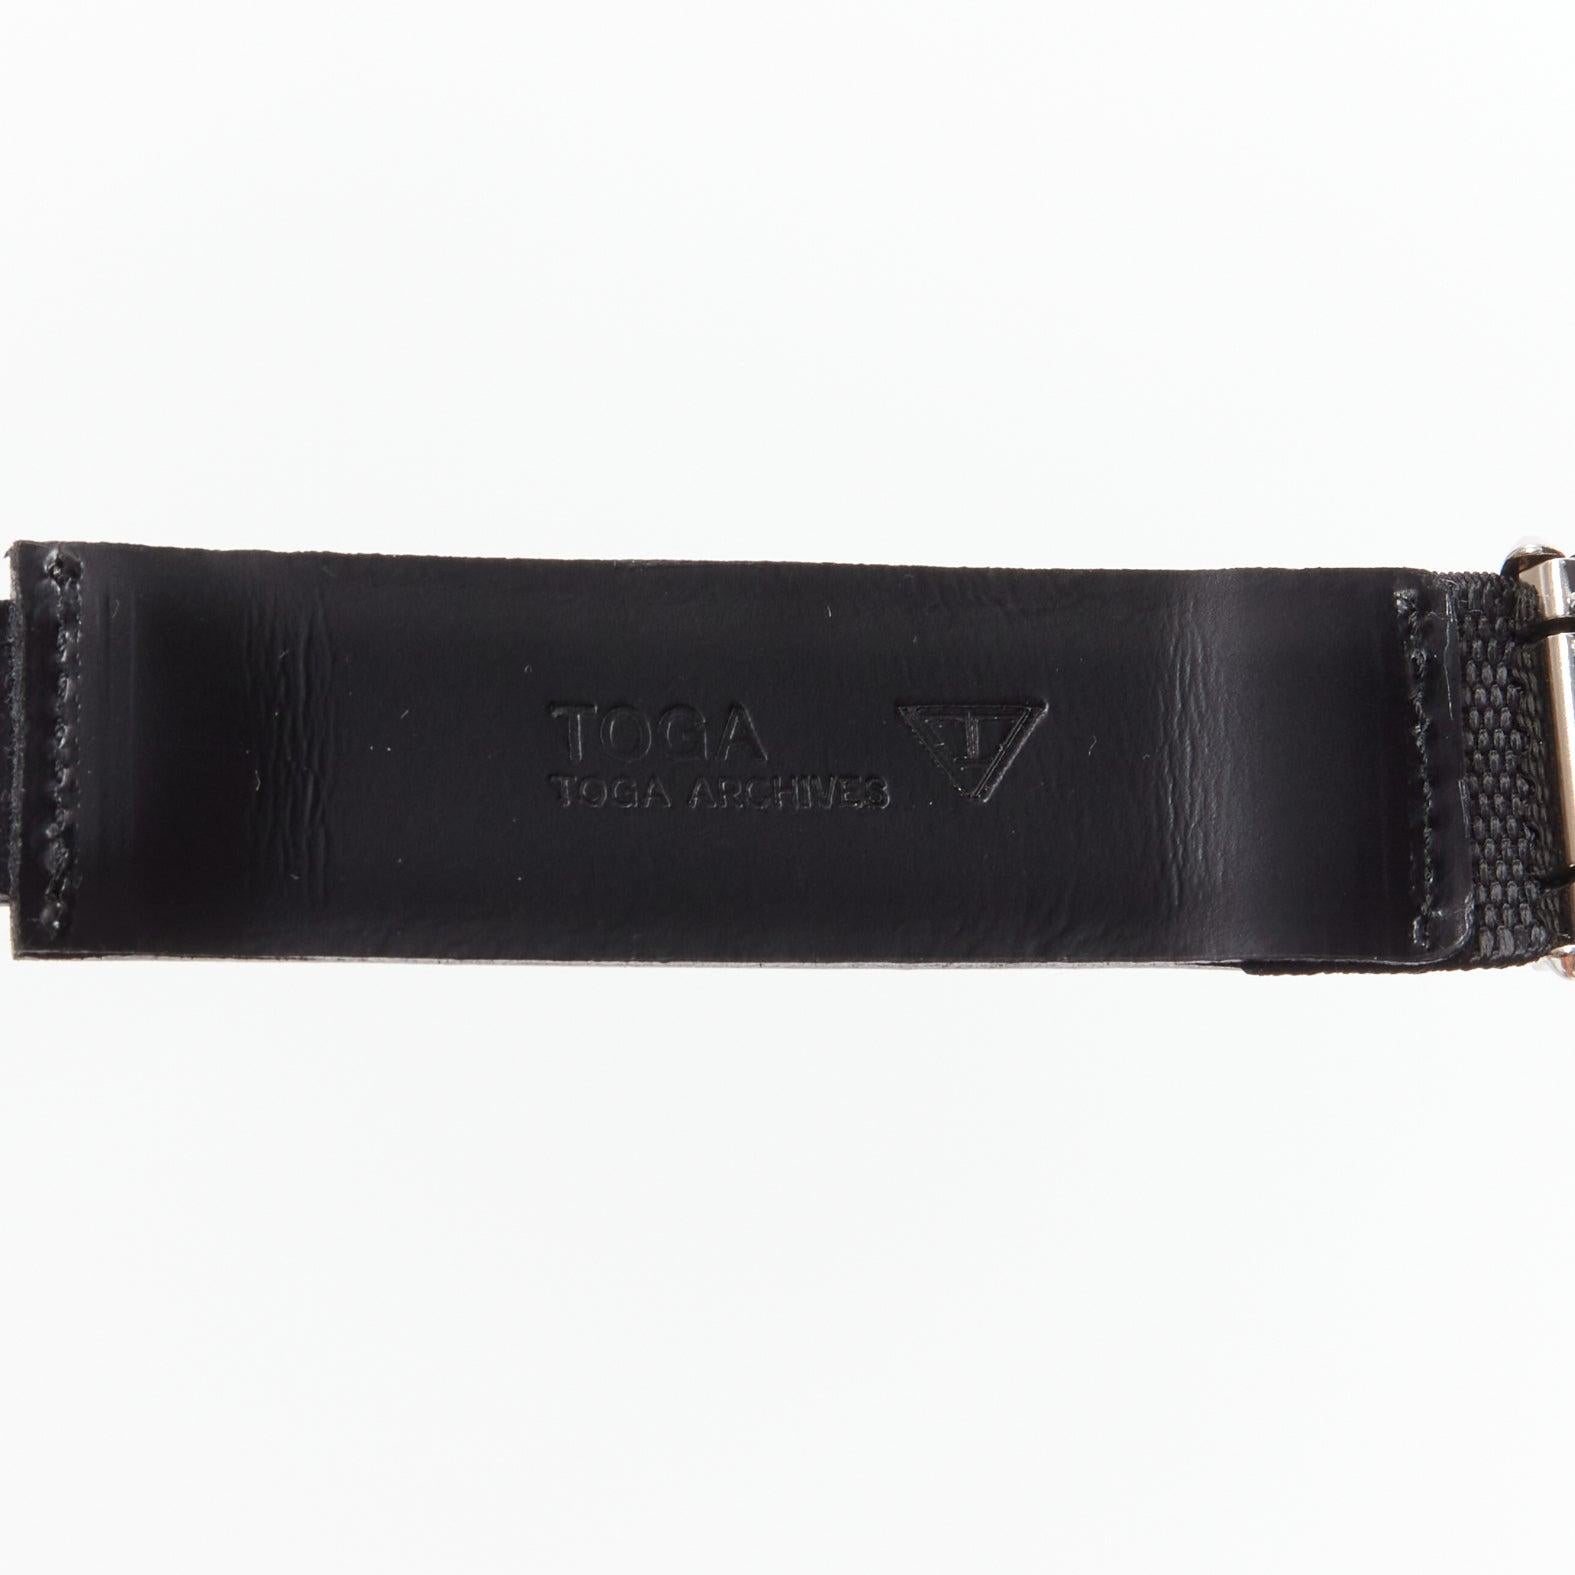 TOGA ARCHIVES silver mirrored acrylic tiles black leather elasticated belt For Sale 3